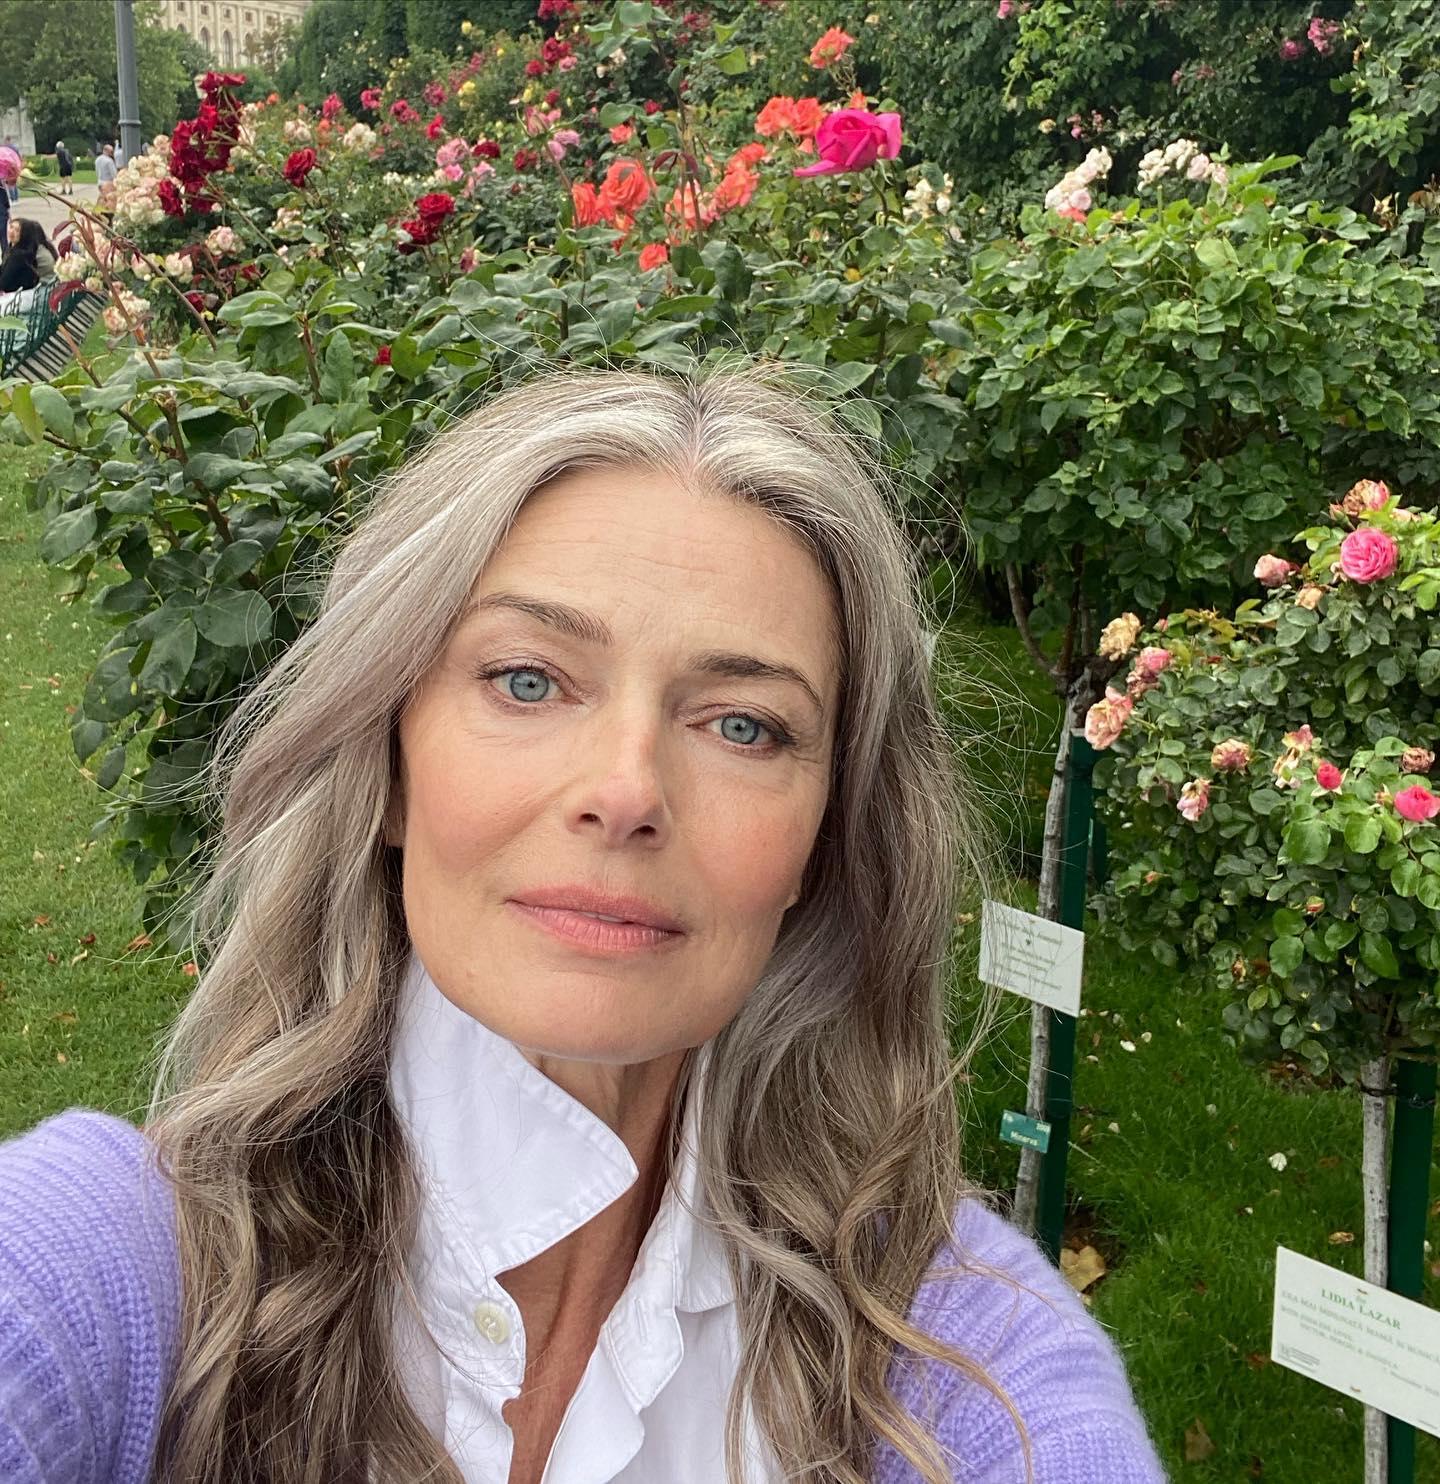 Paulina Porizkova Is 'Grateful' For 'Whirlwind Tour Of Central Europe'